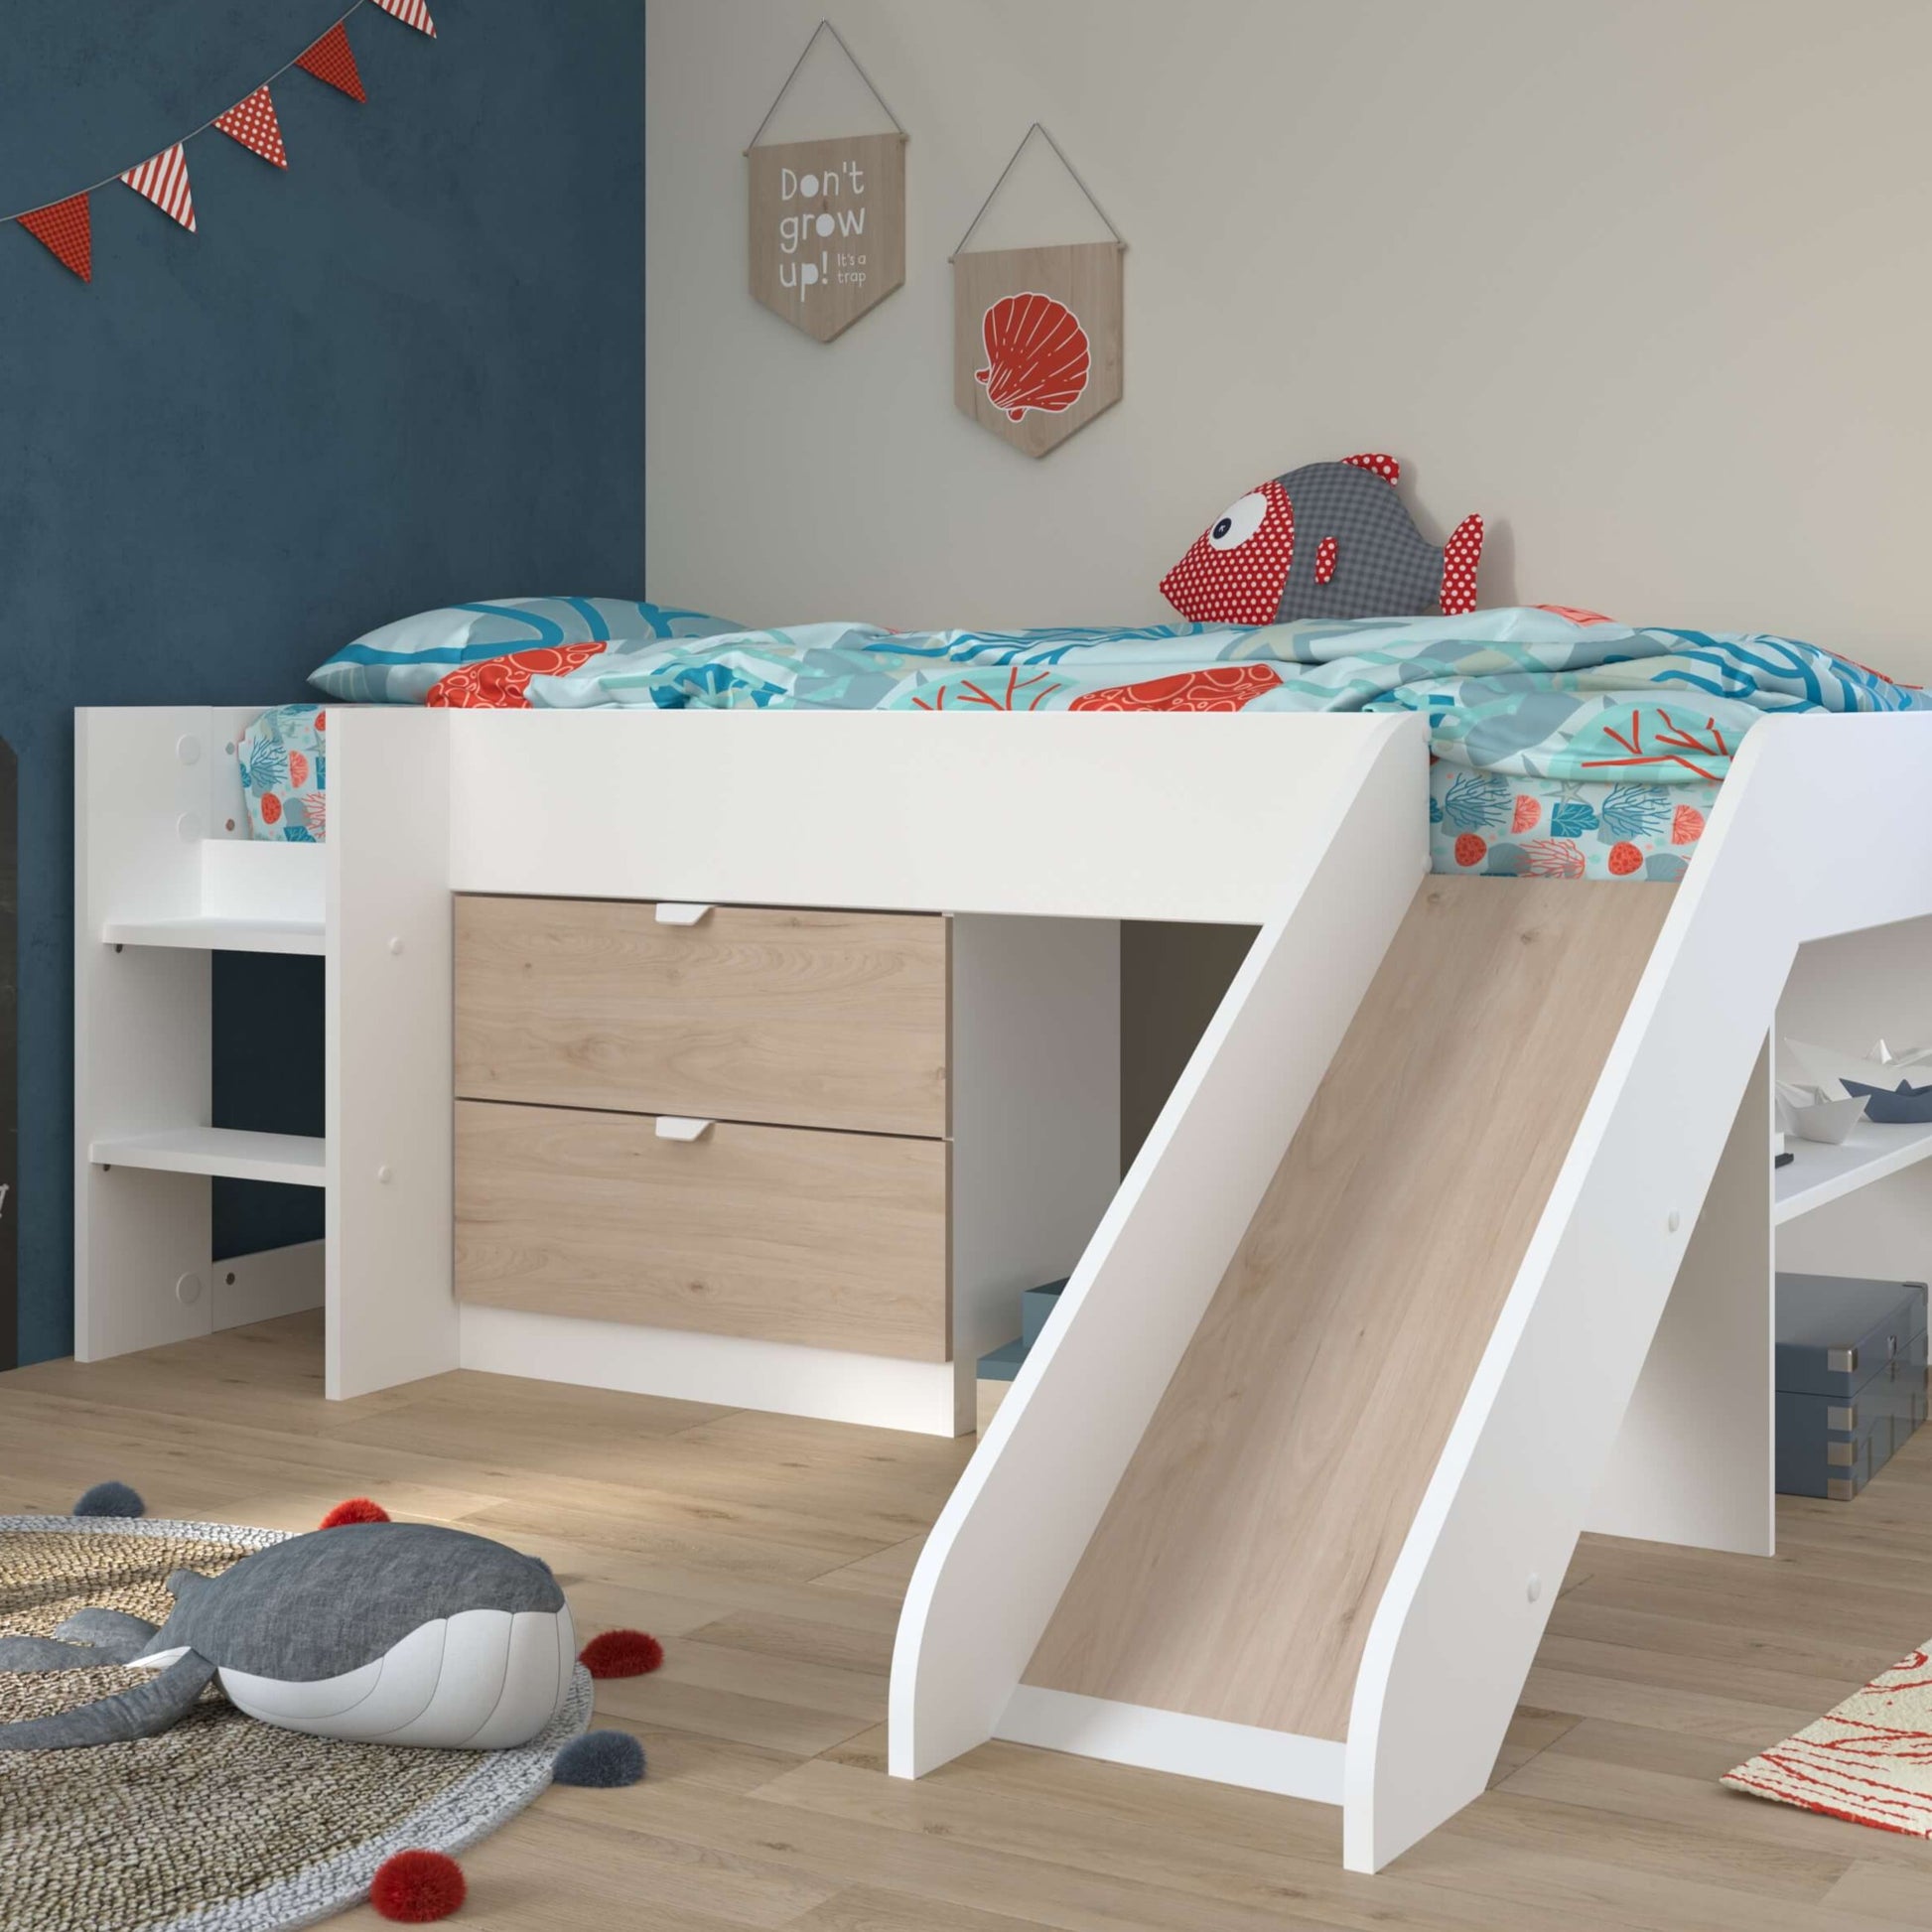 Tobo Mid Sleeper Bed with Slide & Drawers In Boys Room